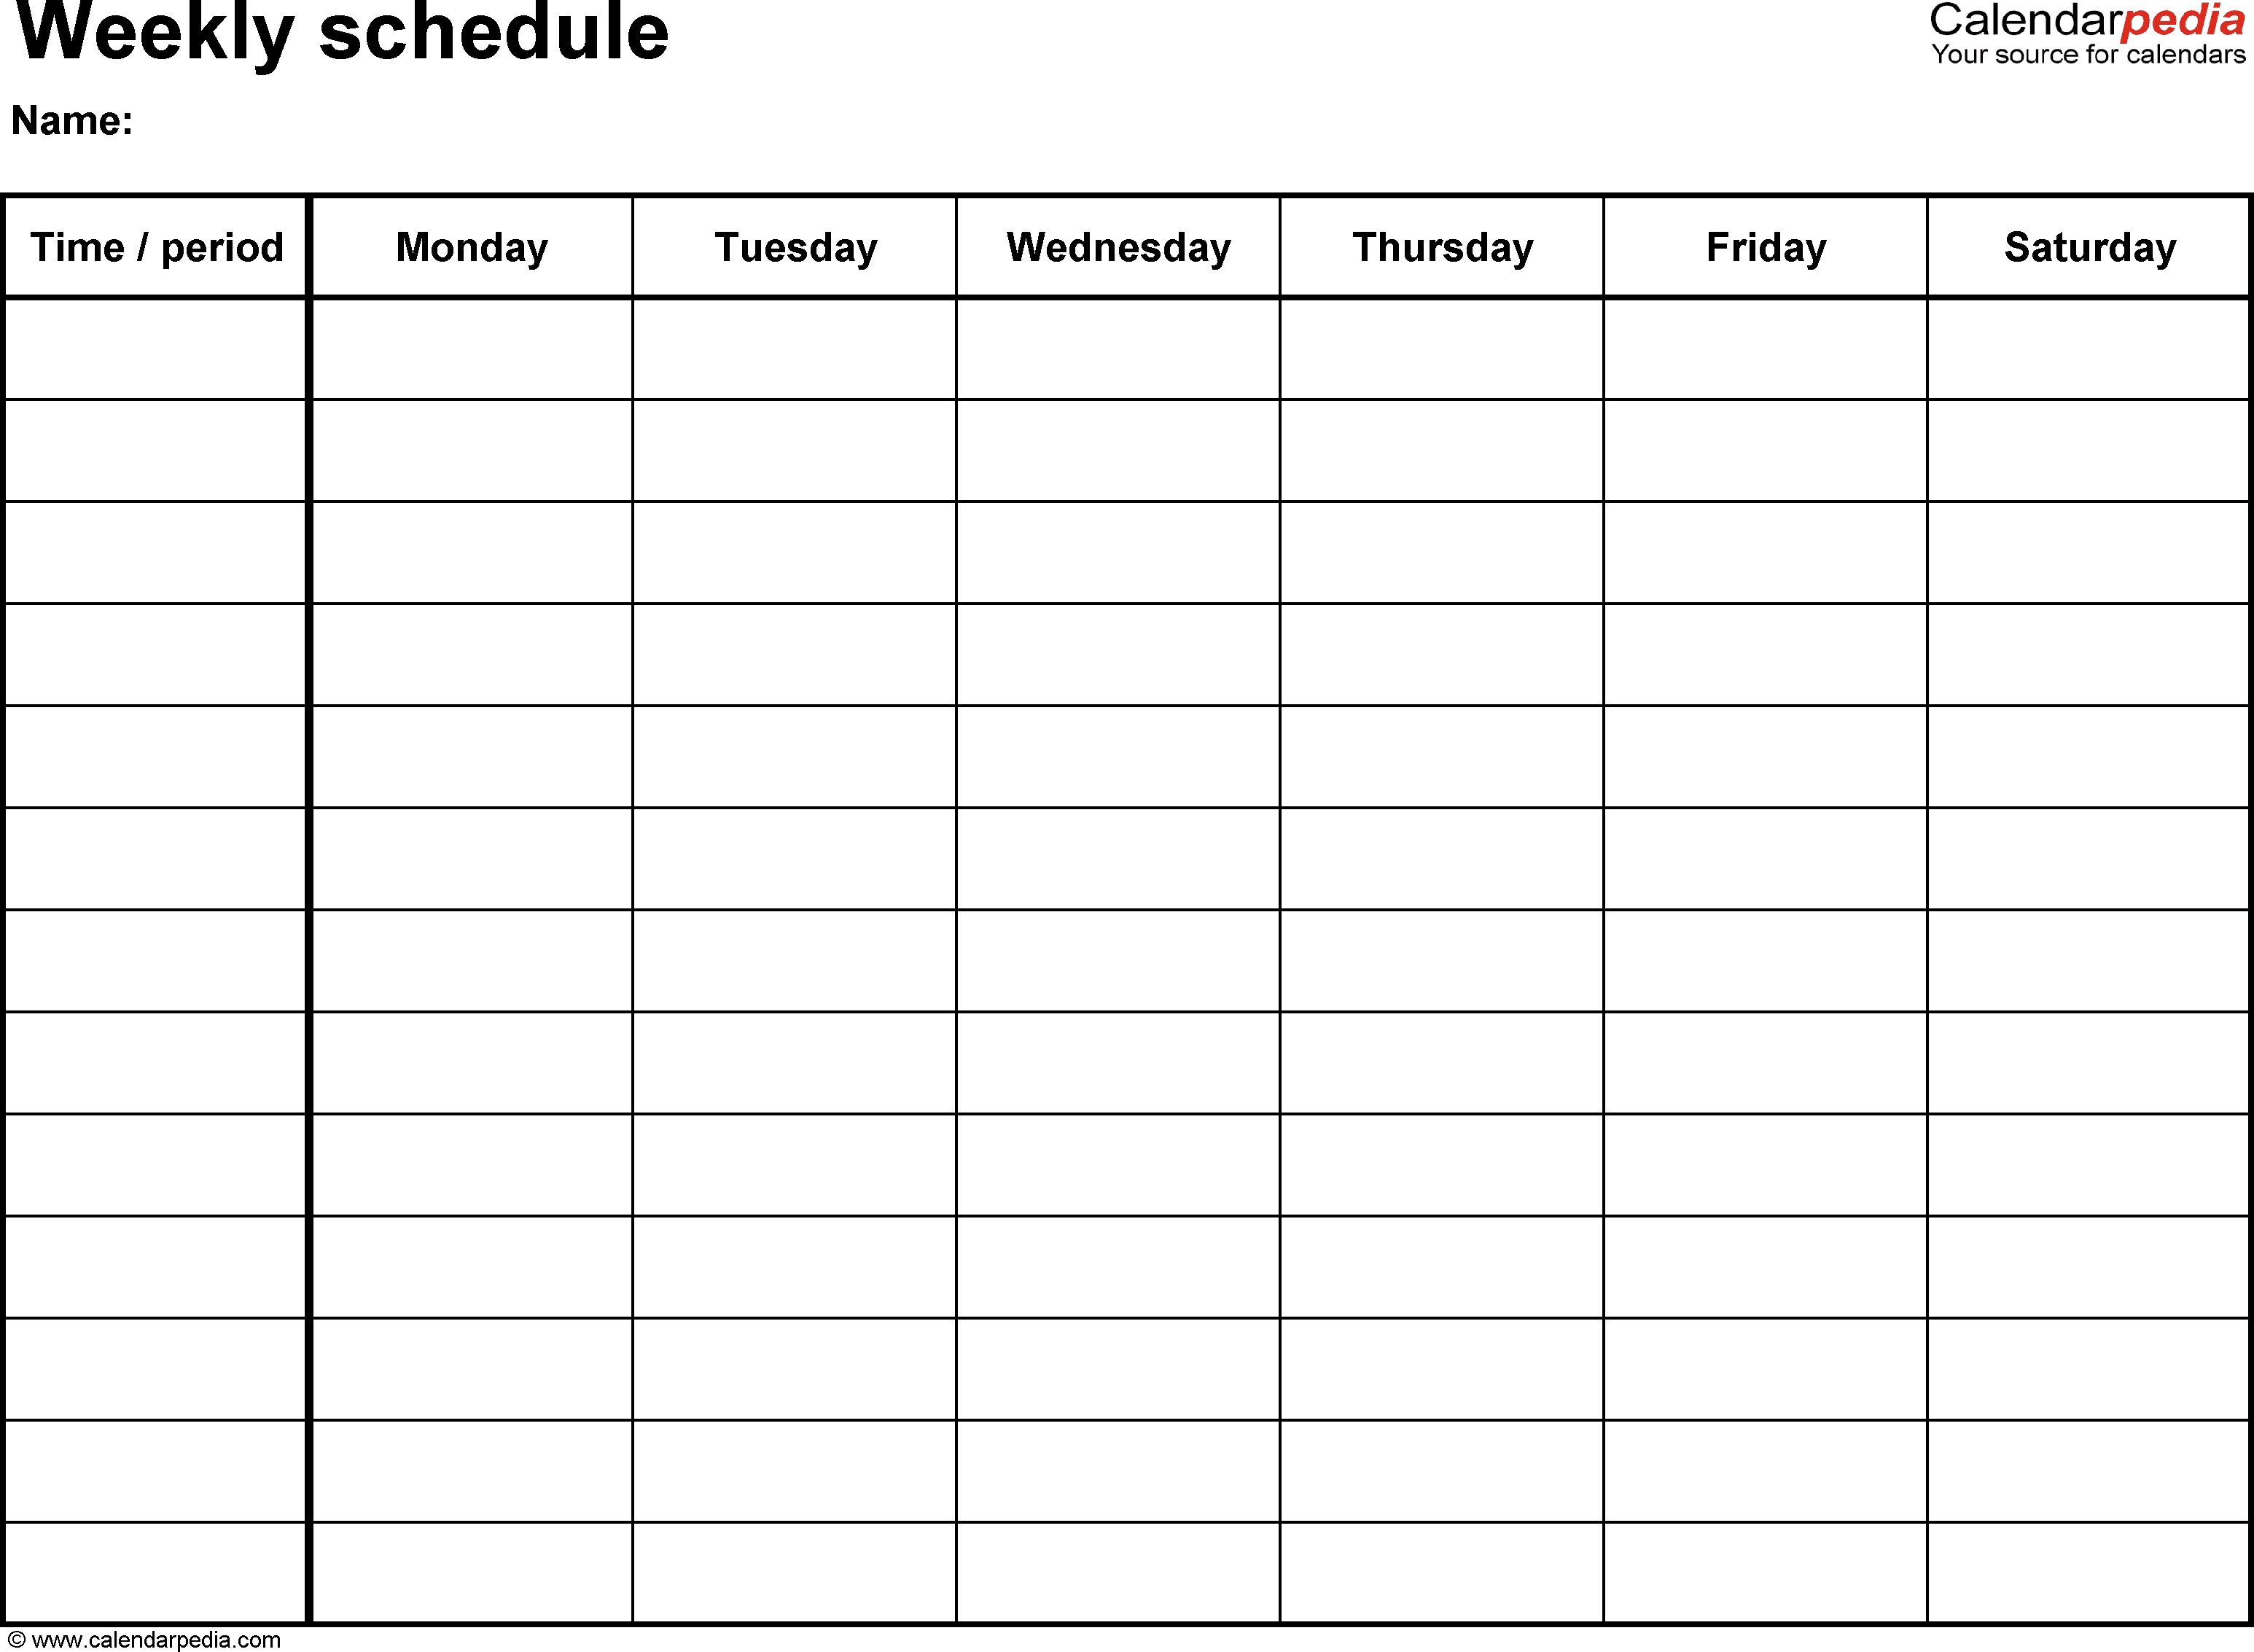 Free Weekly Schedule Templates For Word - 18 Templates-Blank Monday-Friday Calendar Templates